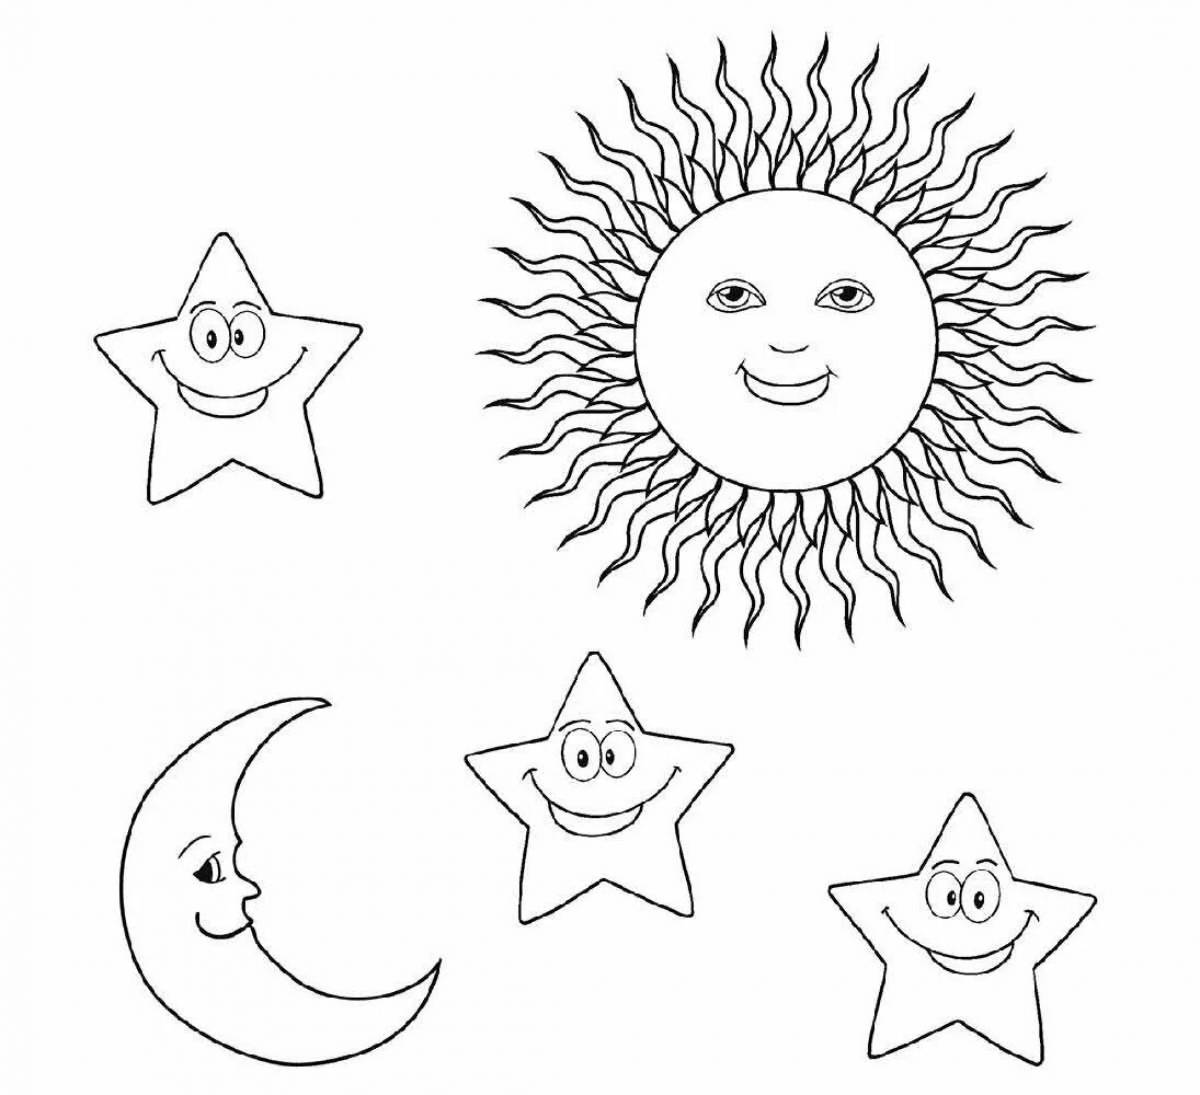 Moon and sun for kids #14